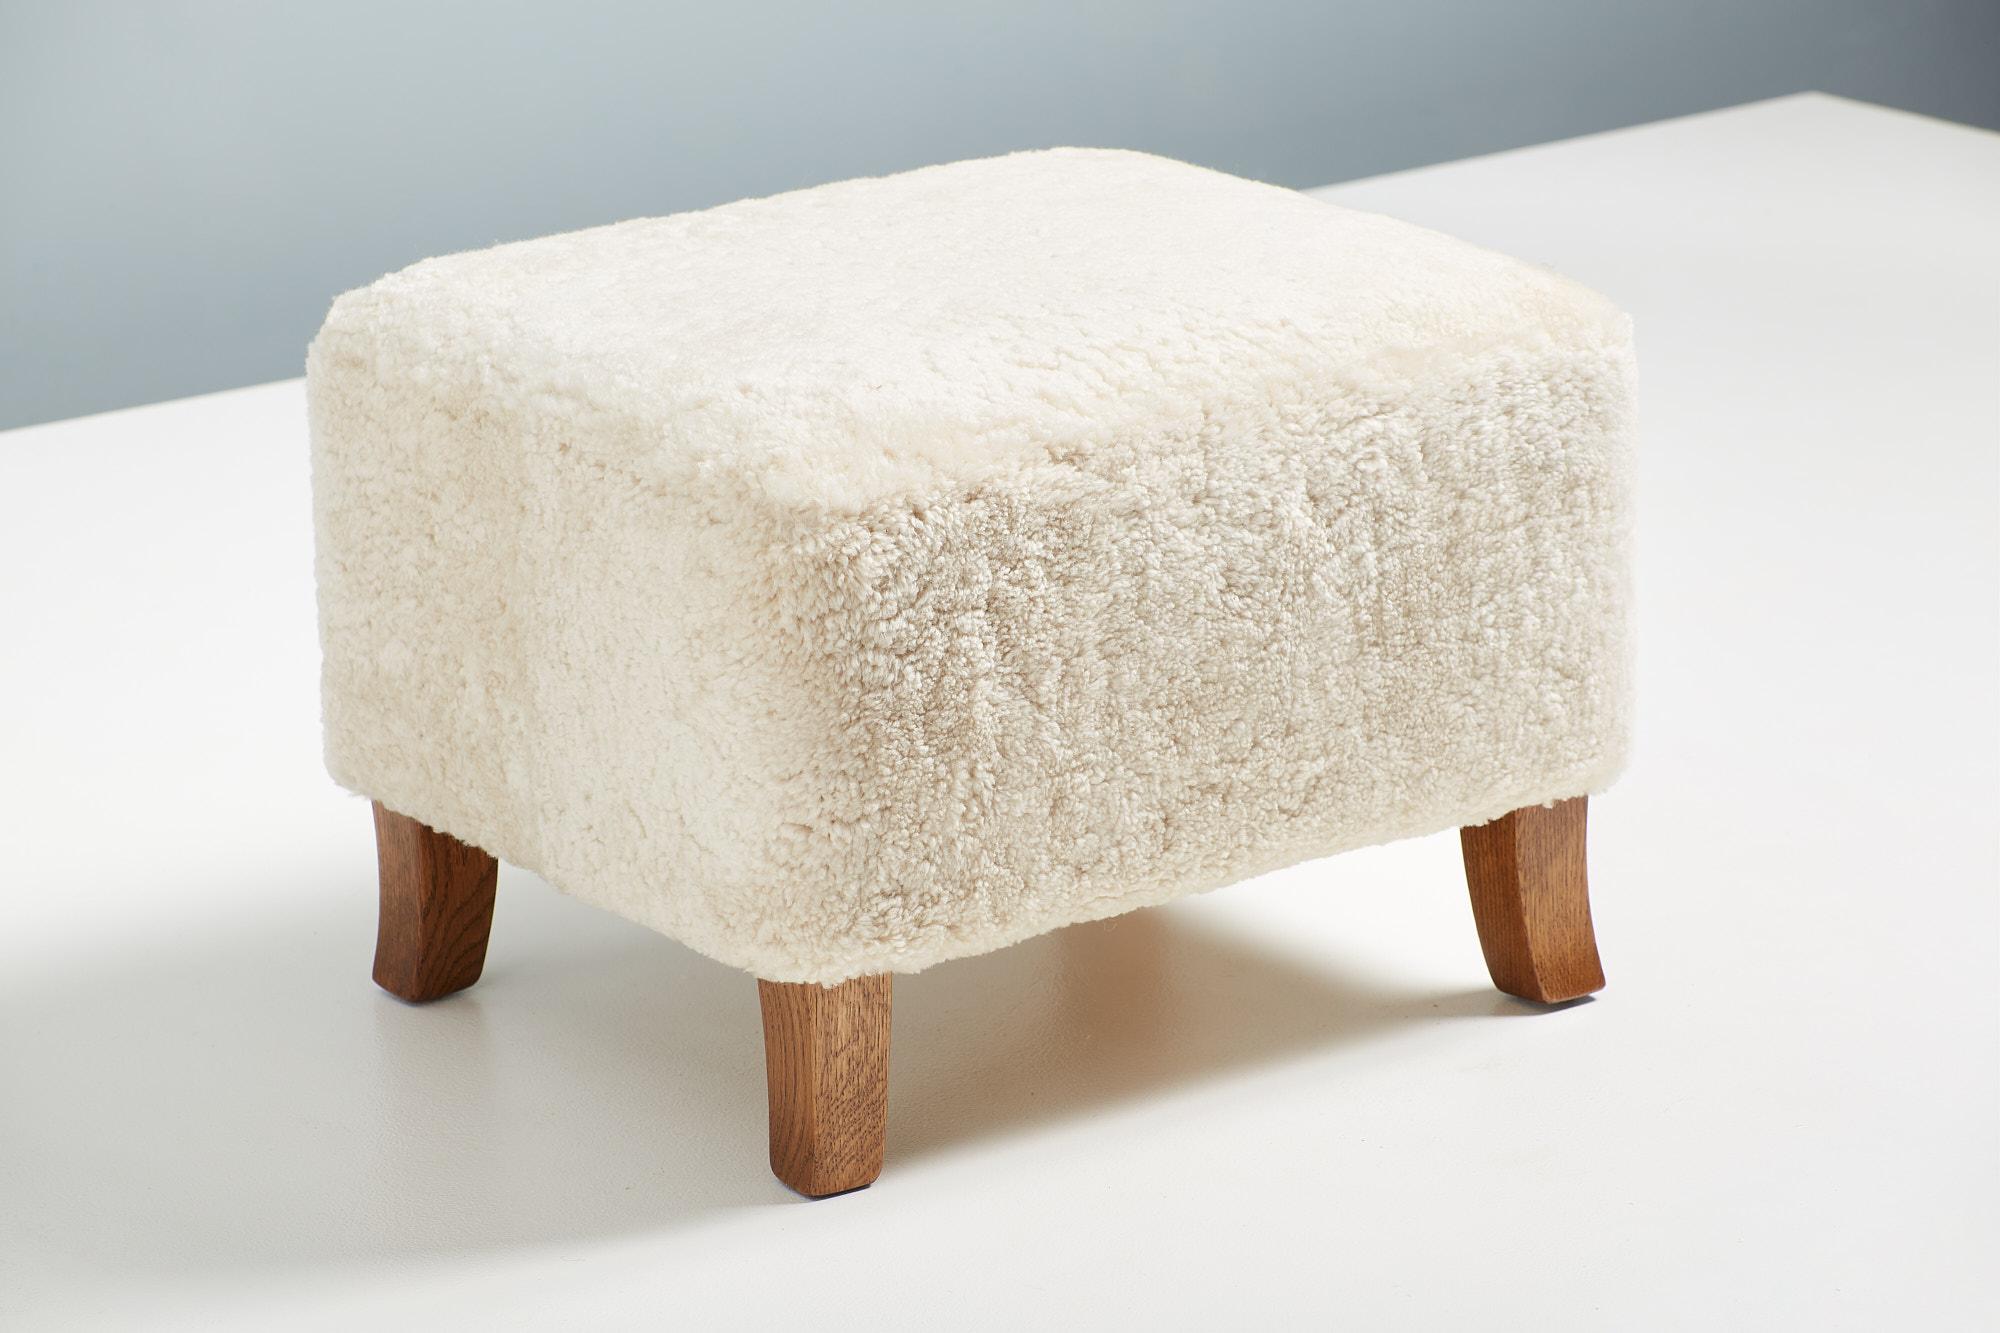 Dagmar Design - Sampo Ottoman

A pair of custom-made ottomans designed & produced at our workshops in London using the highest quality materials. These examples are upholstered in Moonlight sheepskin with carved feet in fumed oak. This ottoman is